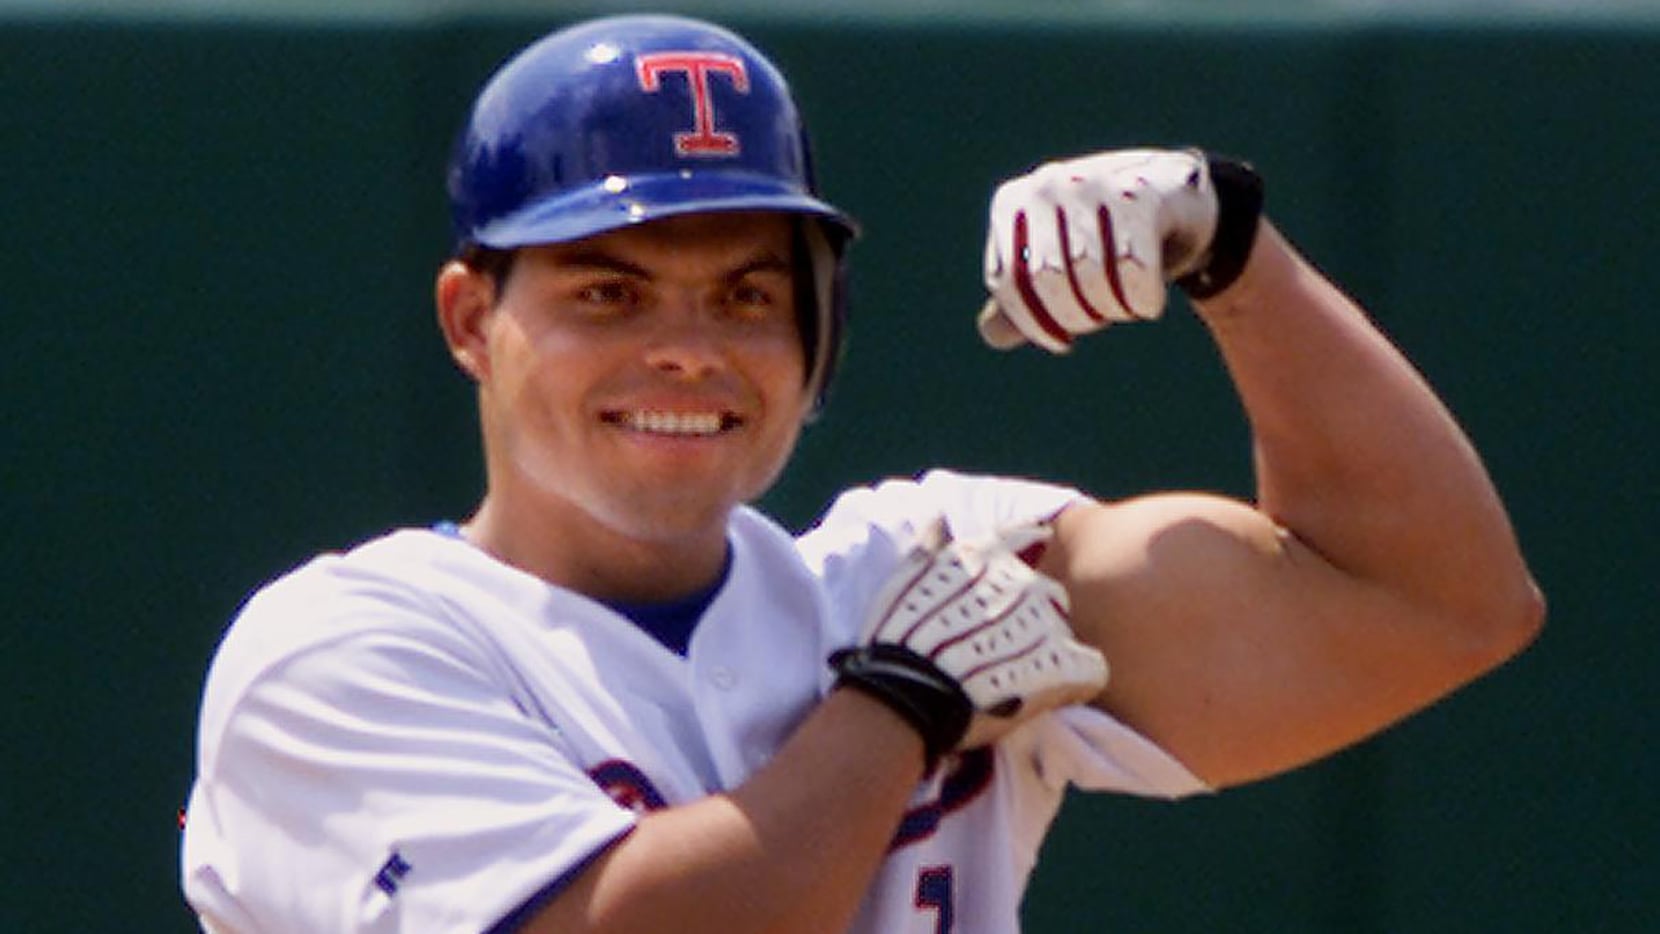 How Pudge Rodriguez blew Rangers broadcaster Eric Nadel away on Day 1